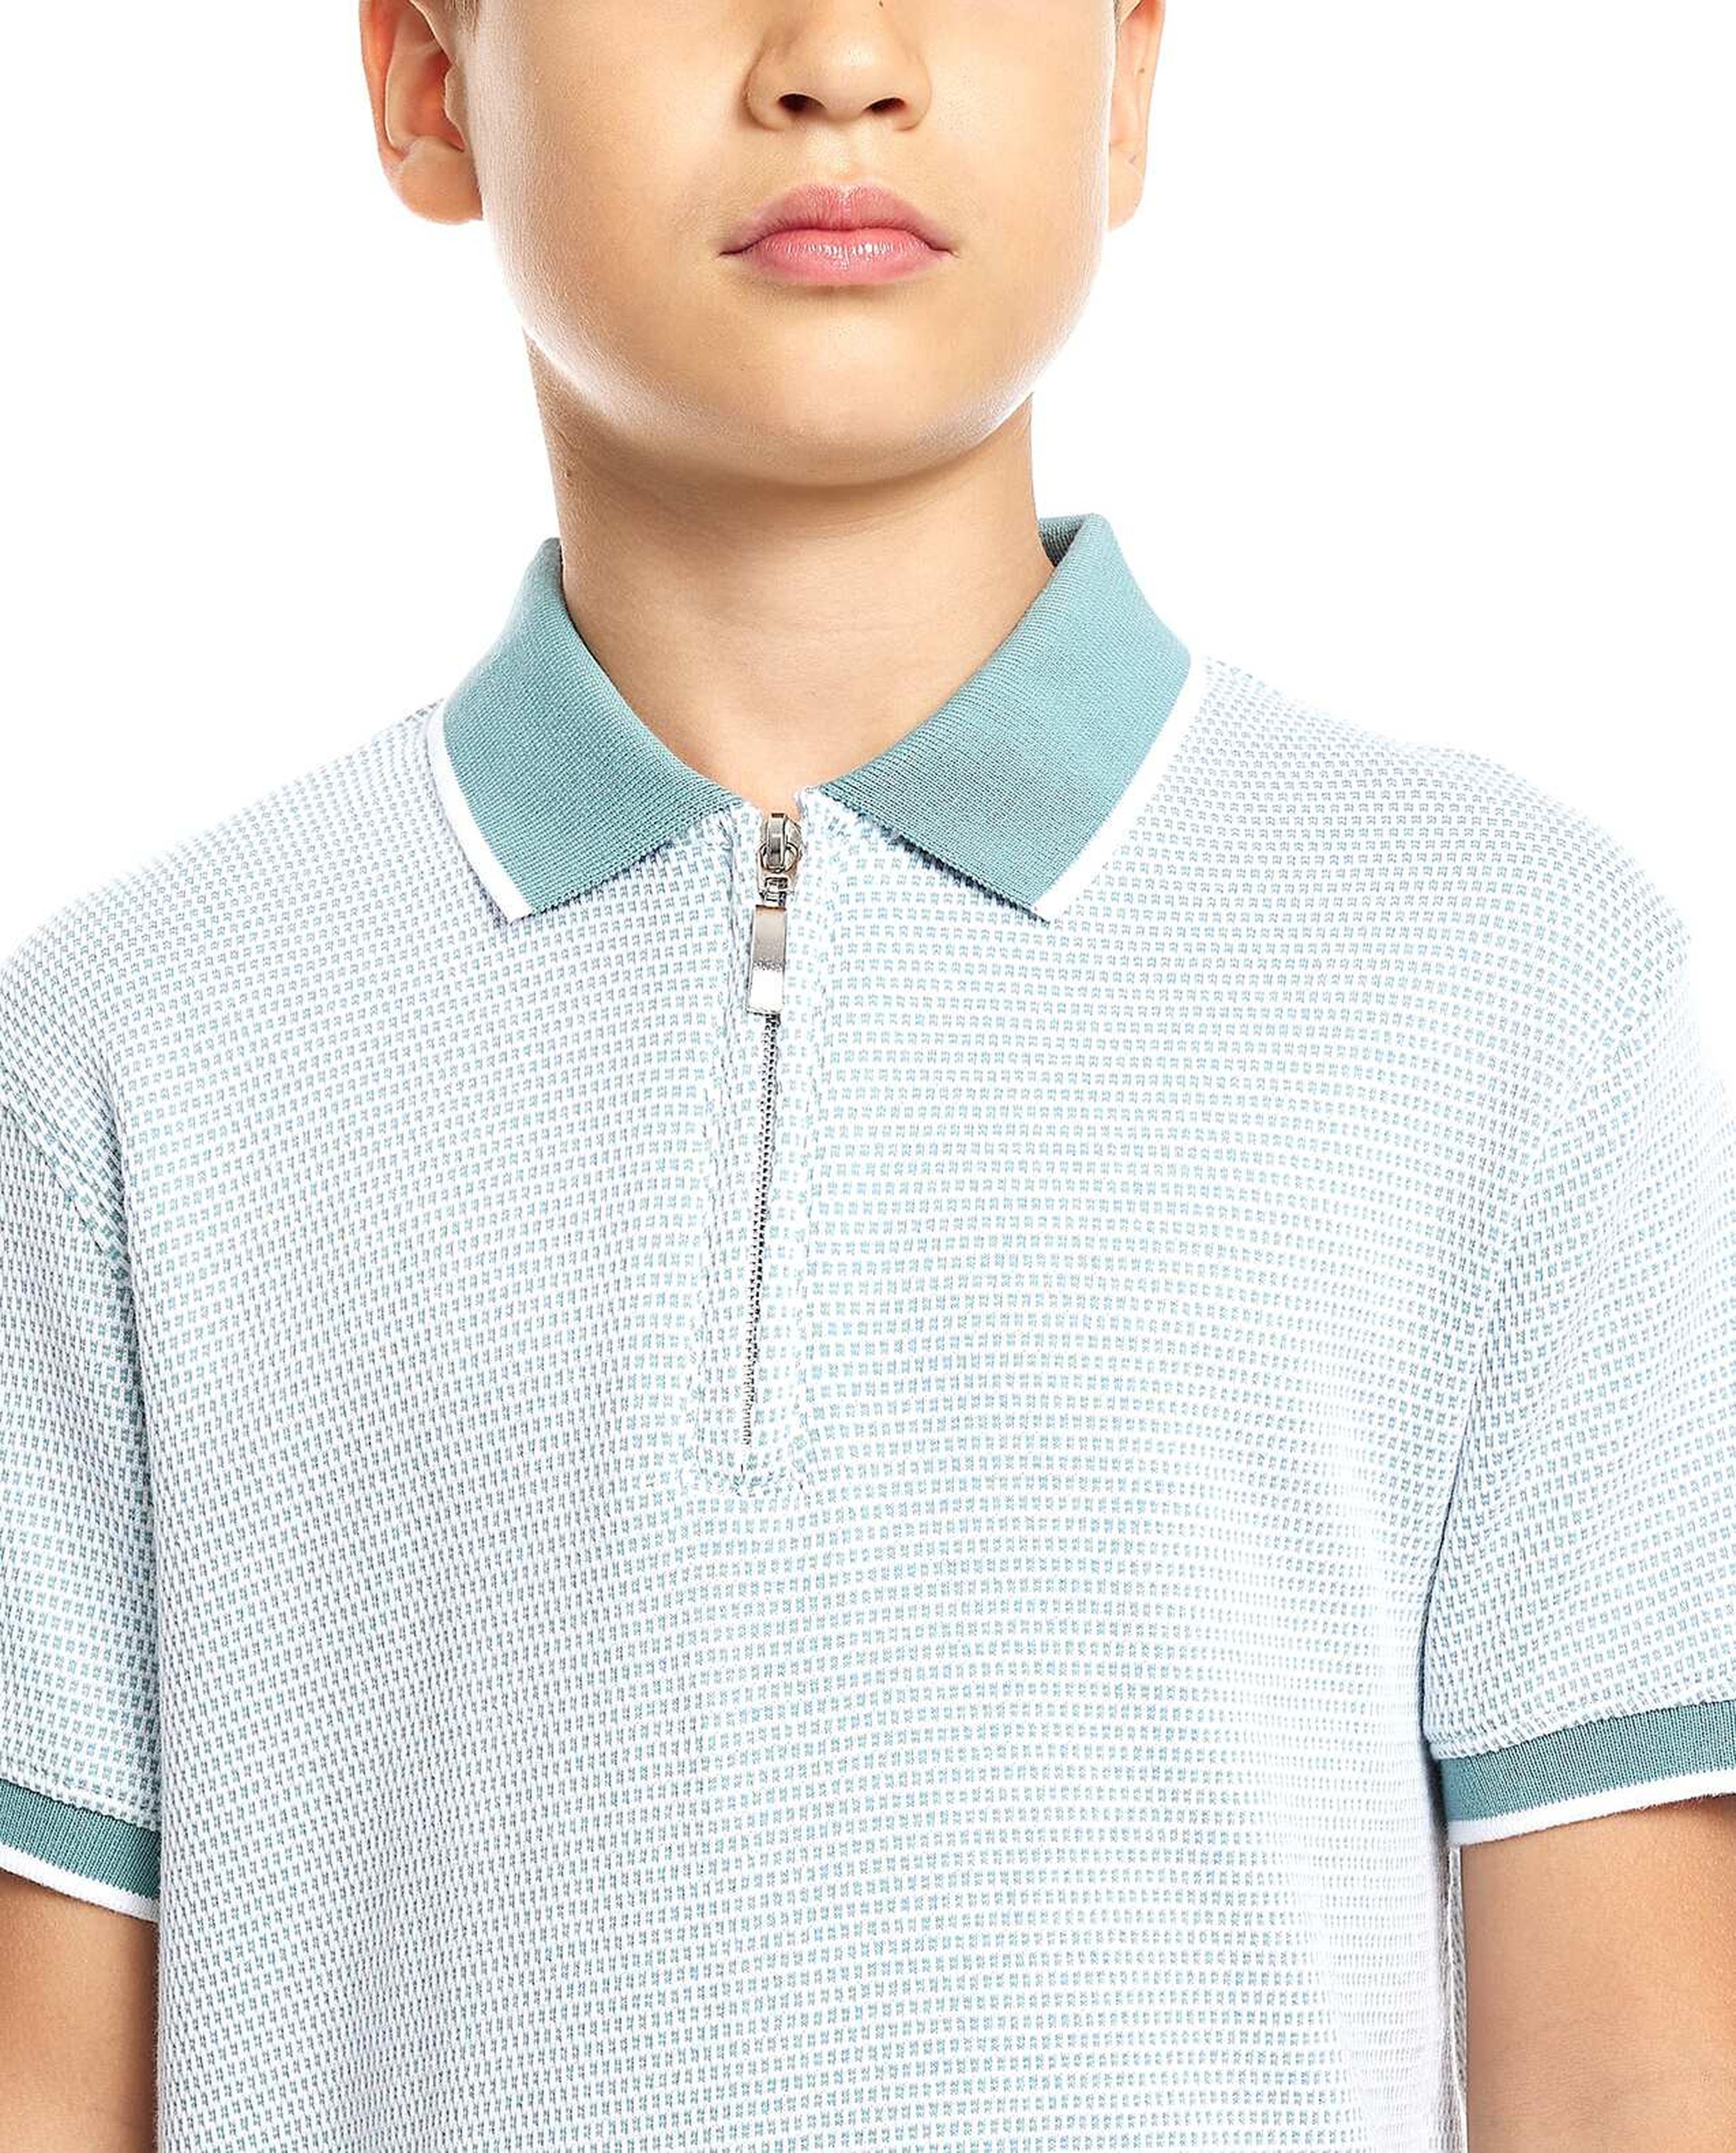 Contrast Trim Polo T-Shirt with Short Sleeves